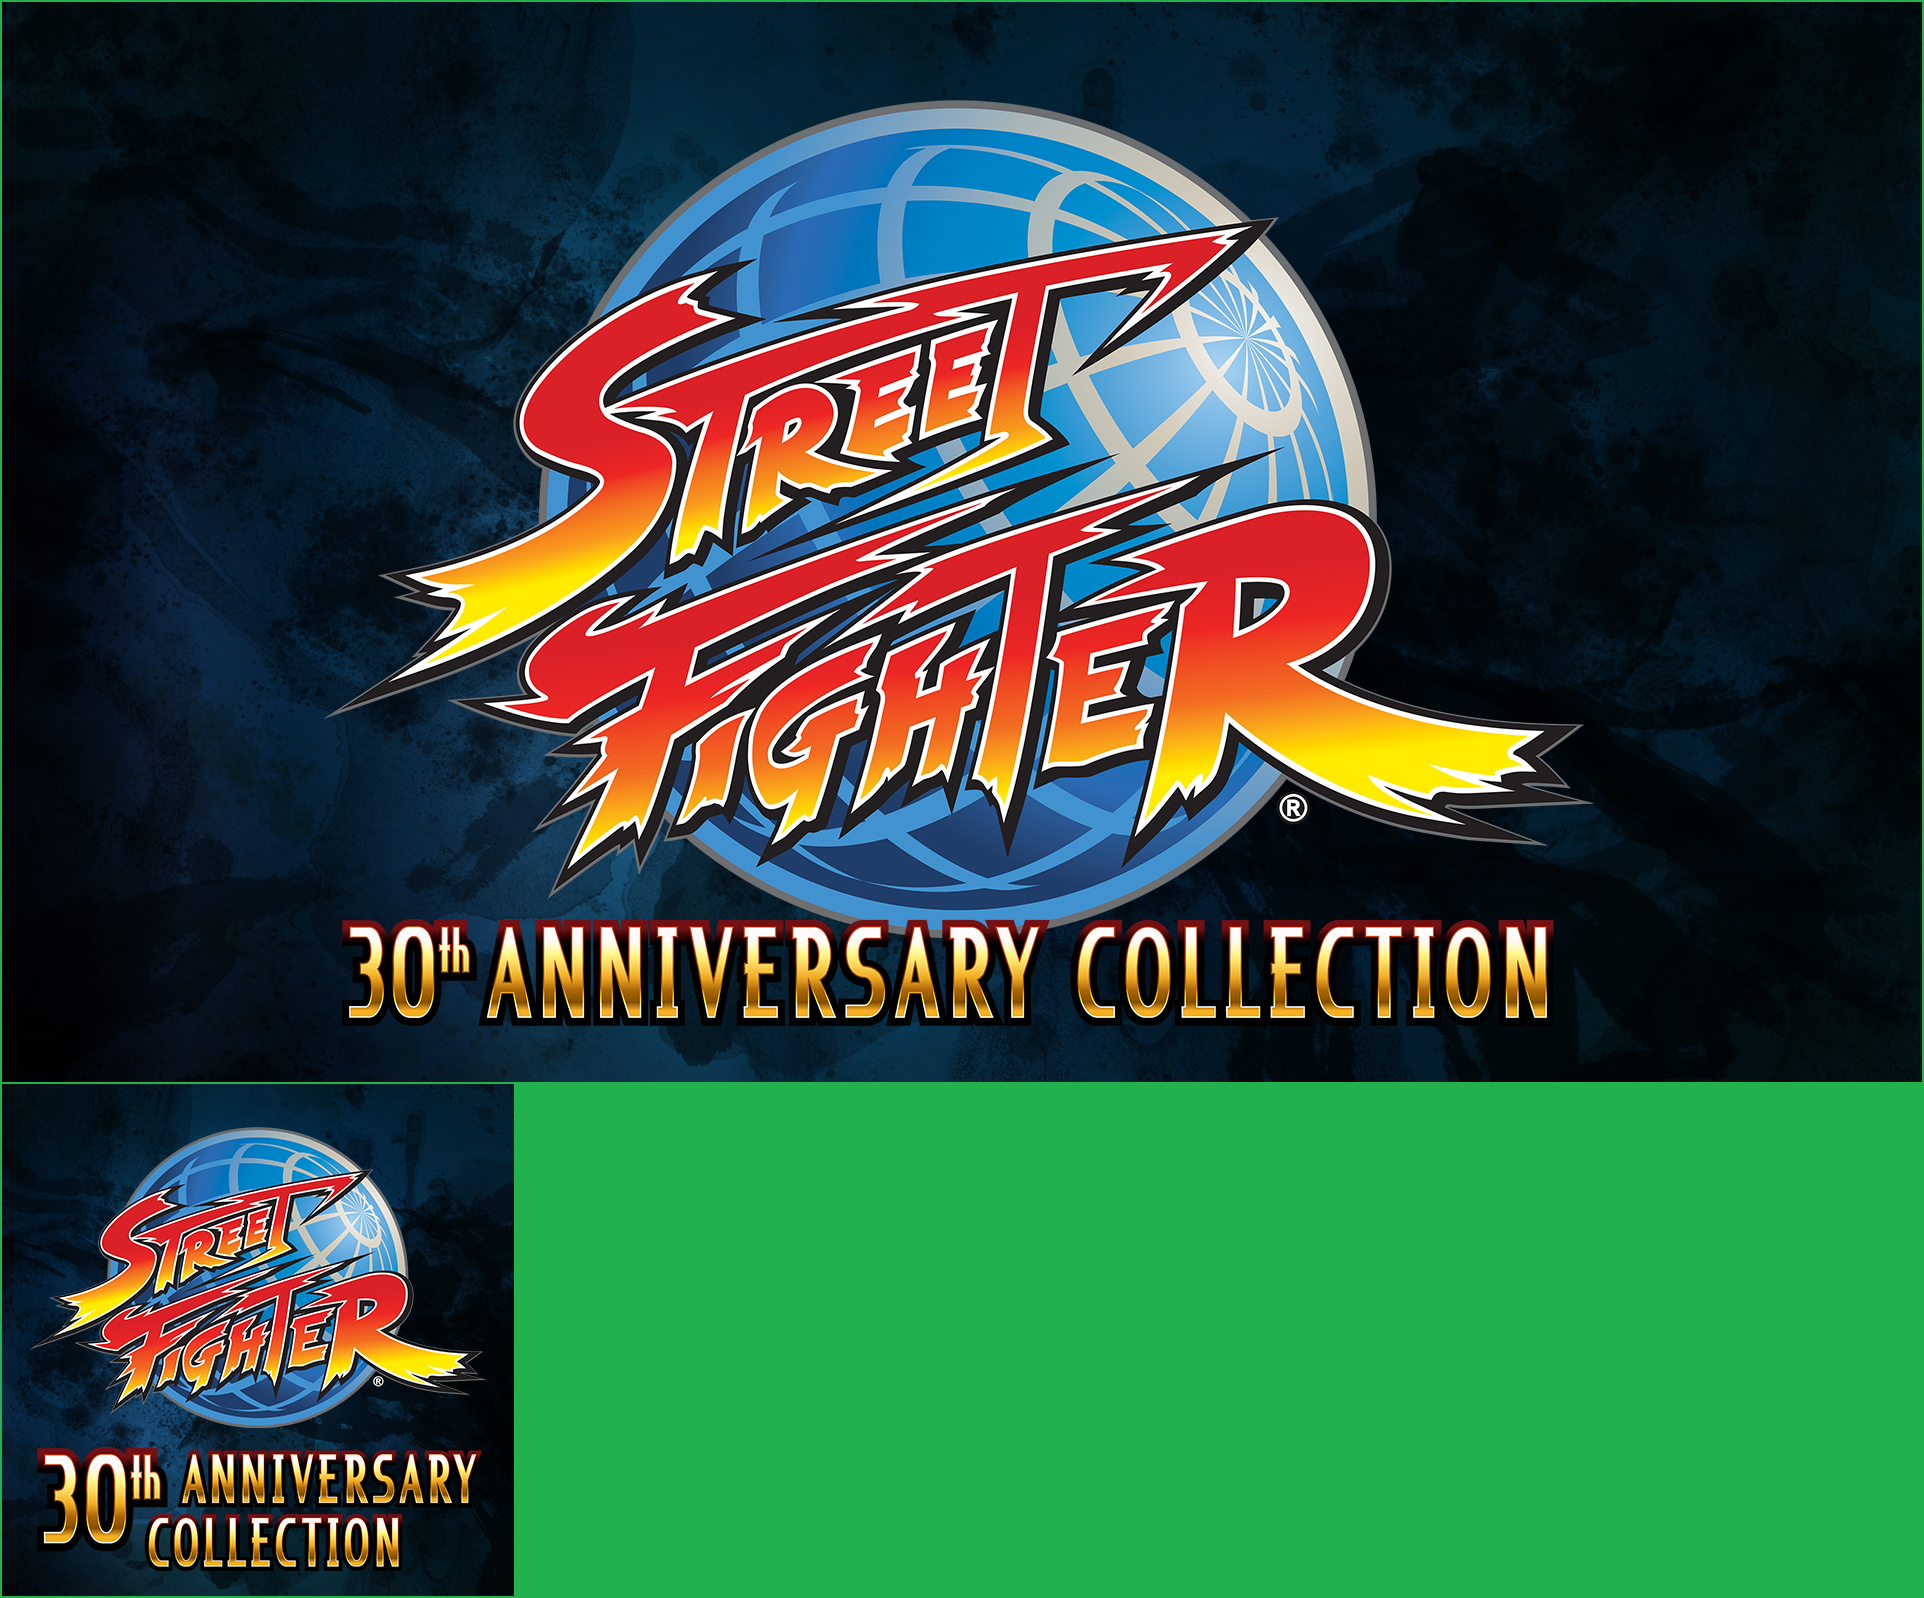 Street Fighter 30th Anniversary Collection / Street Fighter 30th Anniversary Collection International - Game Icon and Banner